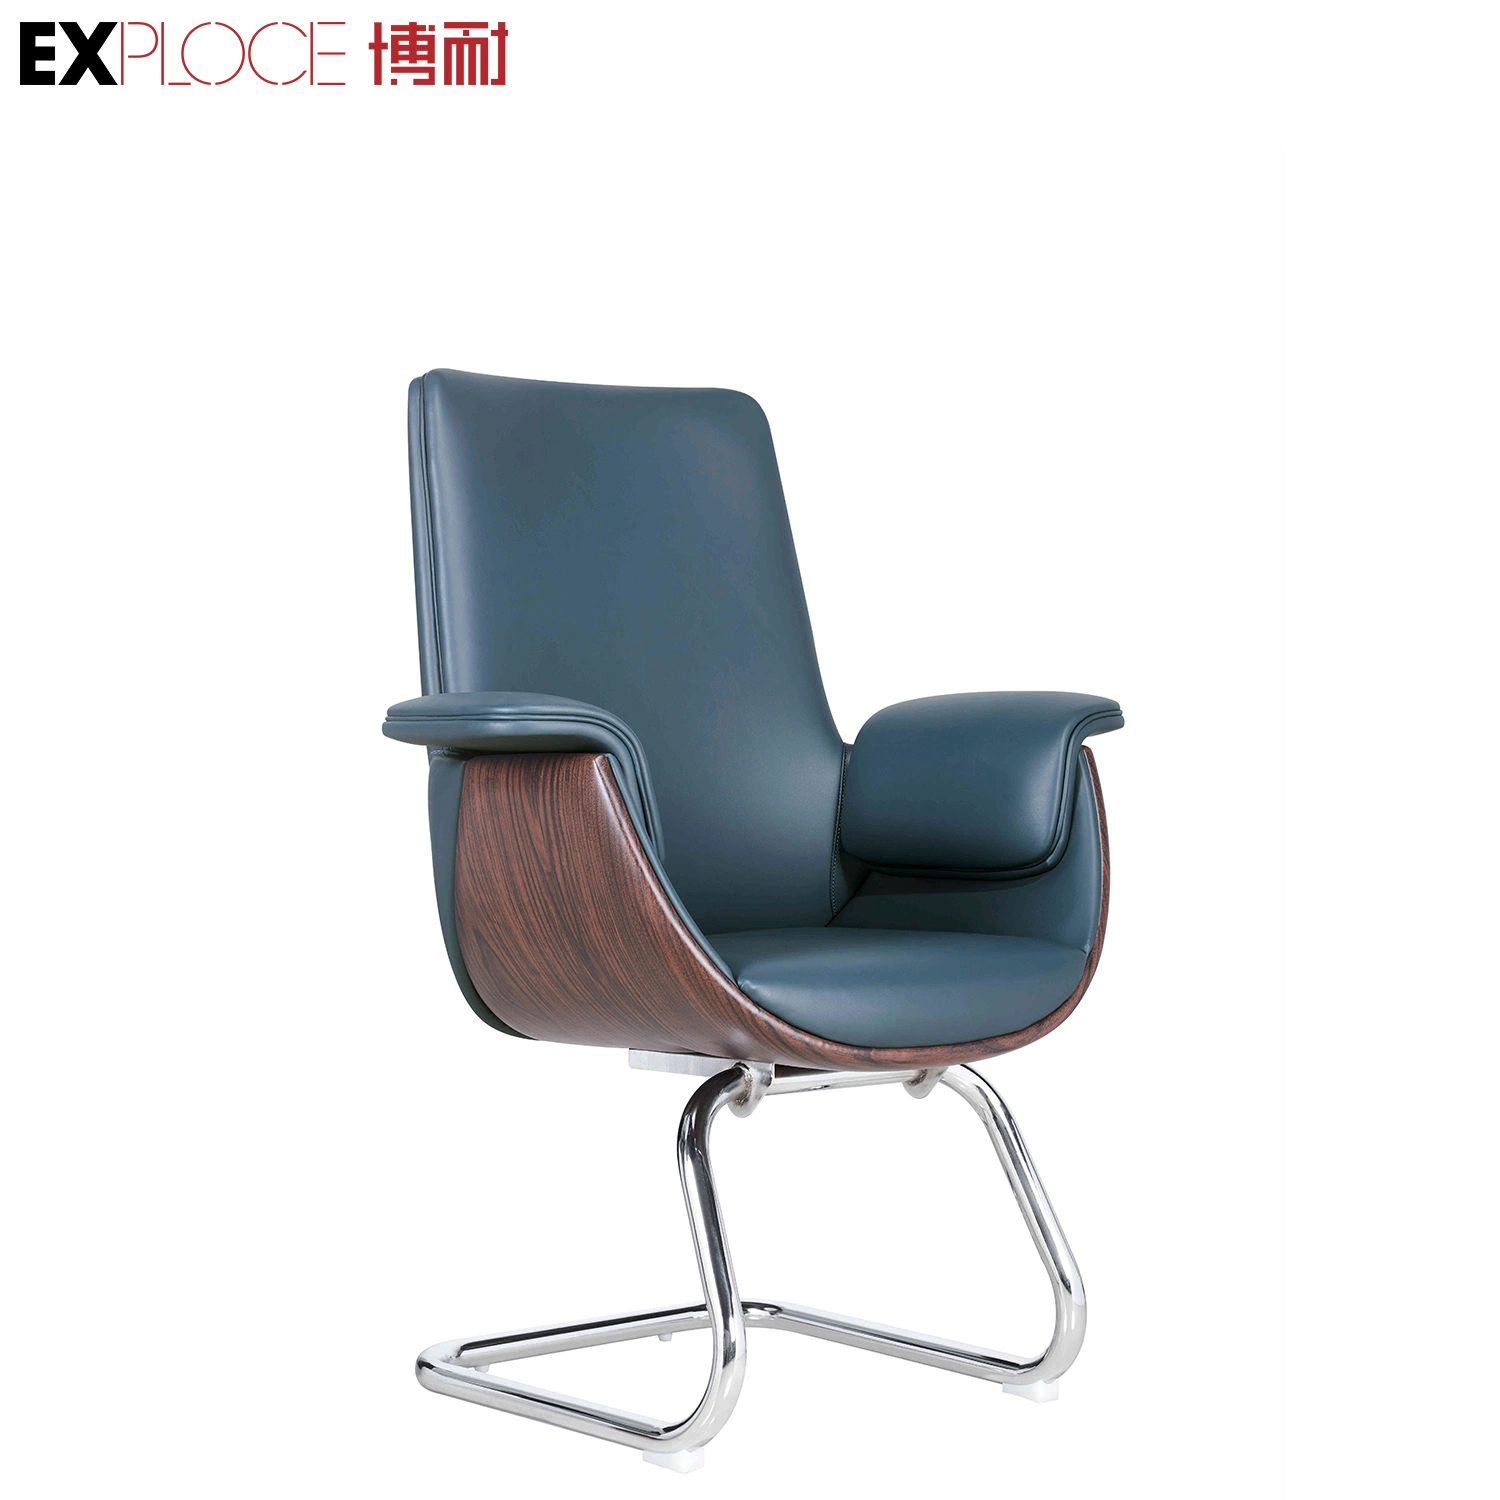 New Model Best Ergonomic Office Chair Arched Chair 150kg Grey Leather Chair for Office Top China Furniture